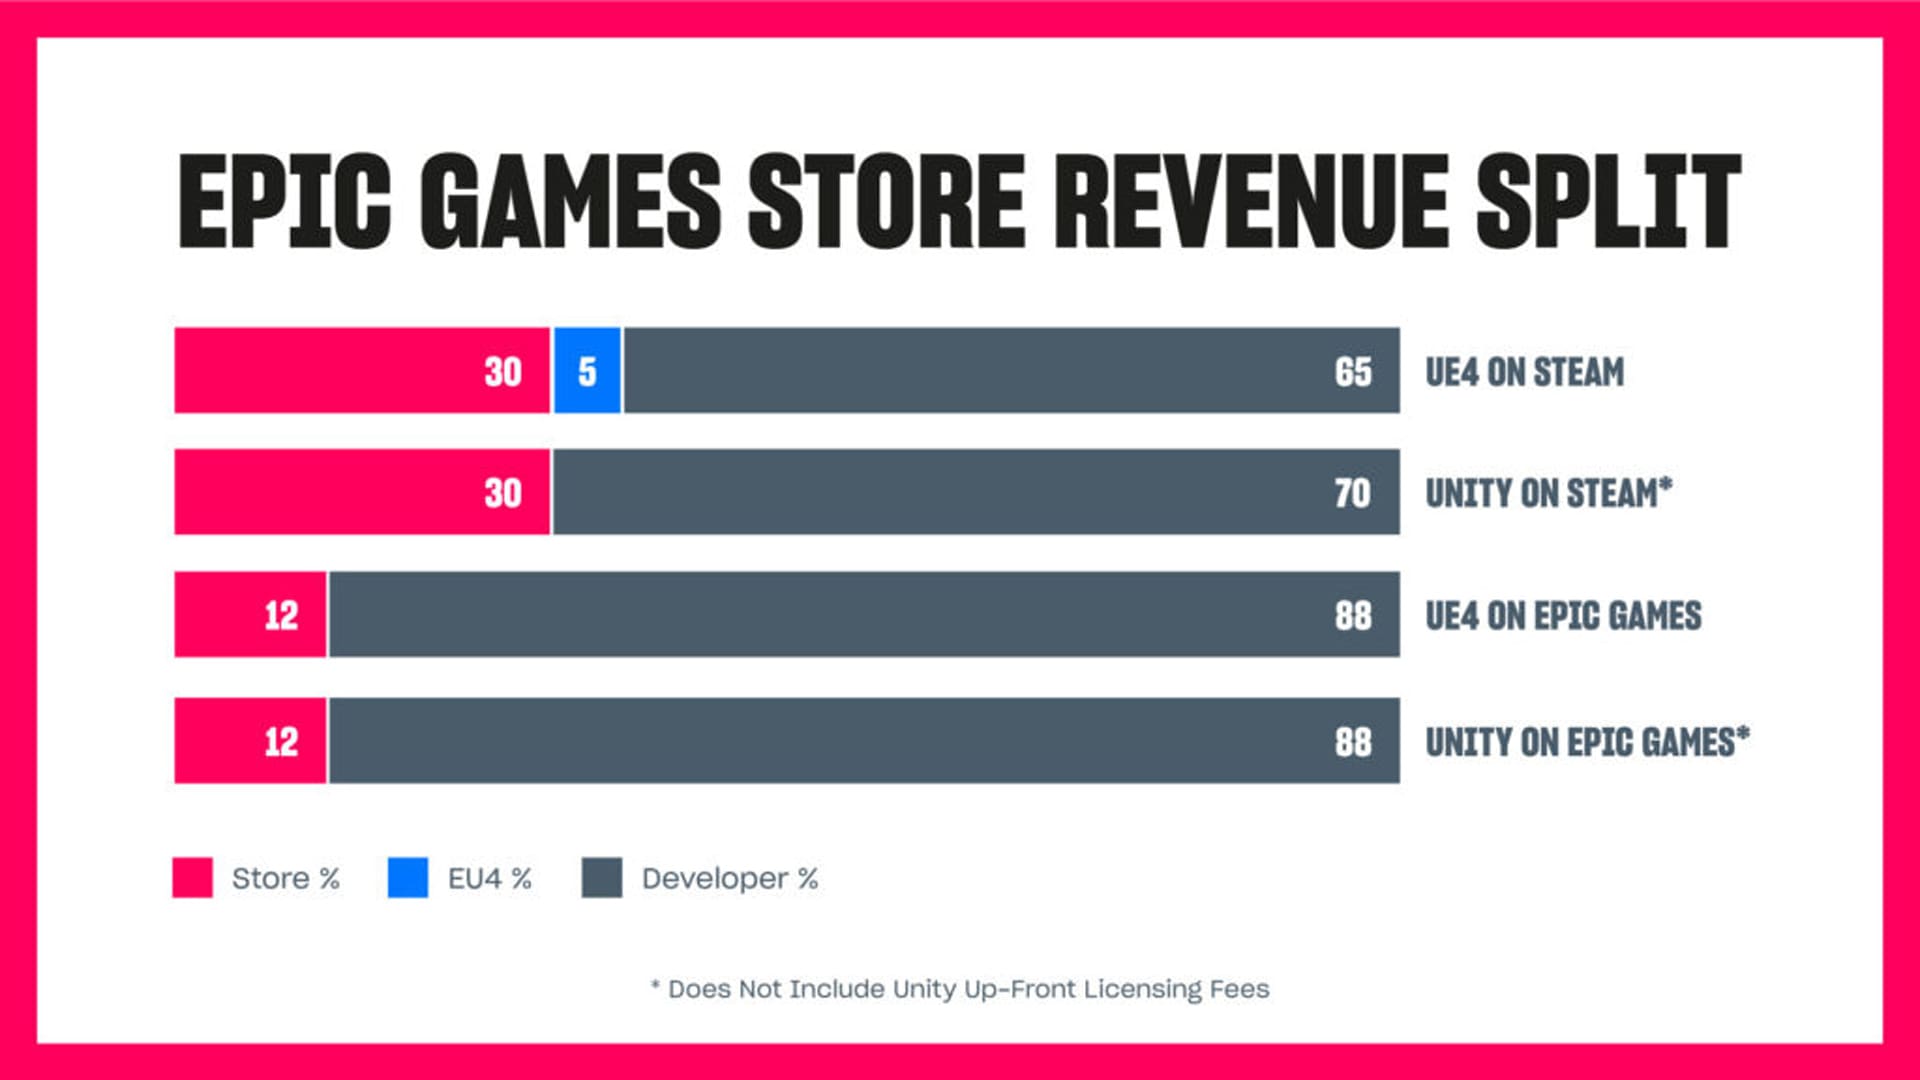 Comparison of Epic Games Store with competitors, showing advantages and challenges